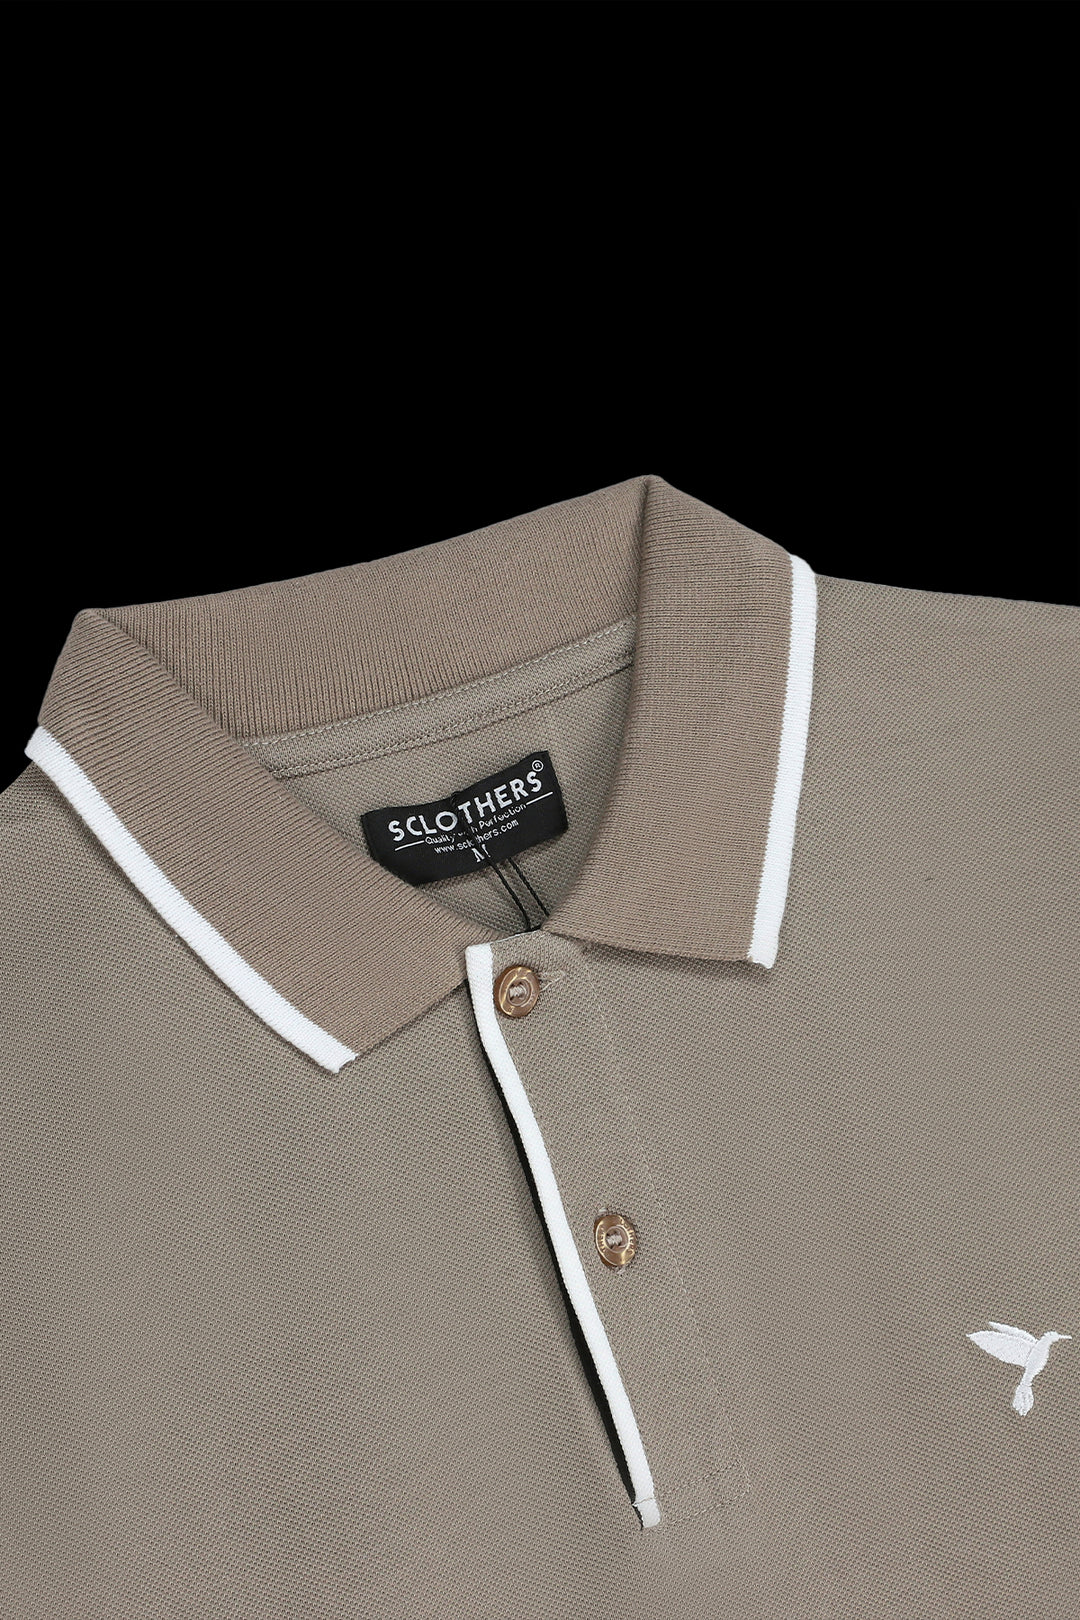 Dusty Taupe Contrast Placket Polo Shirt - S23 - MP0224R